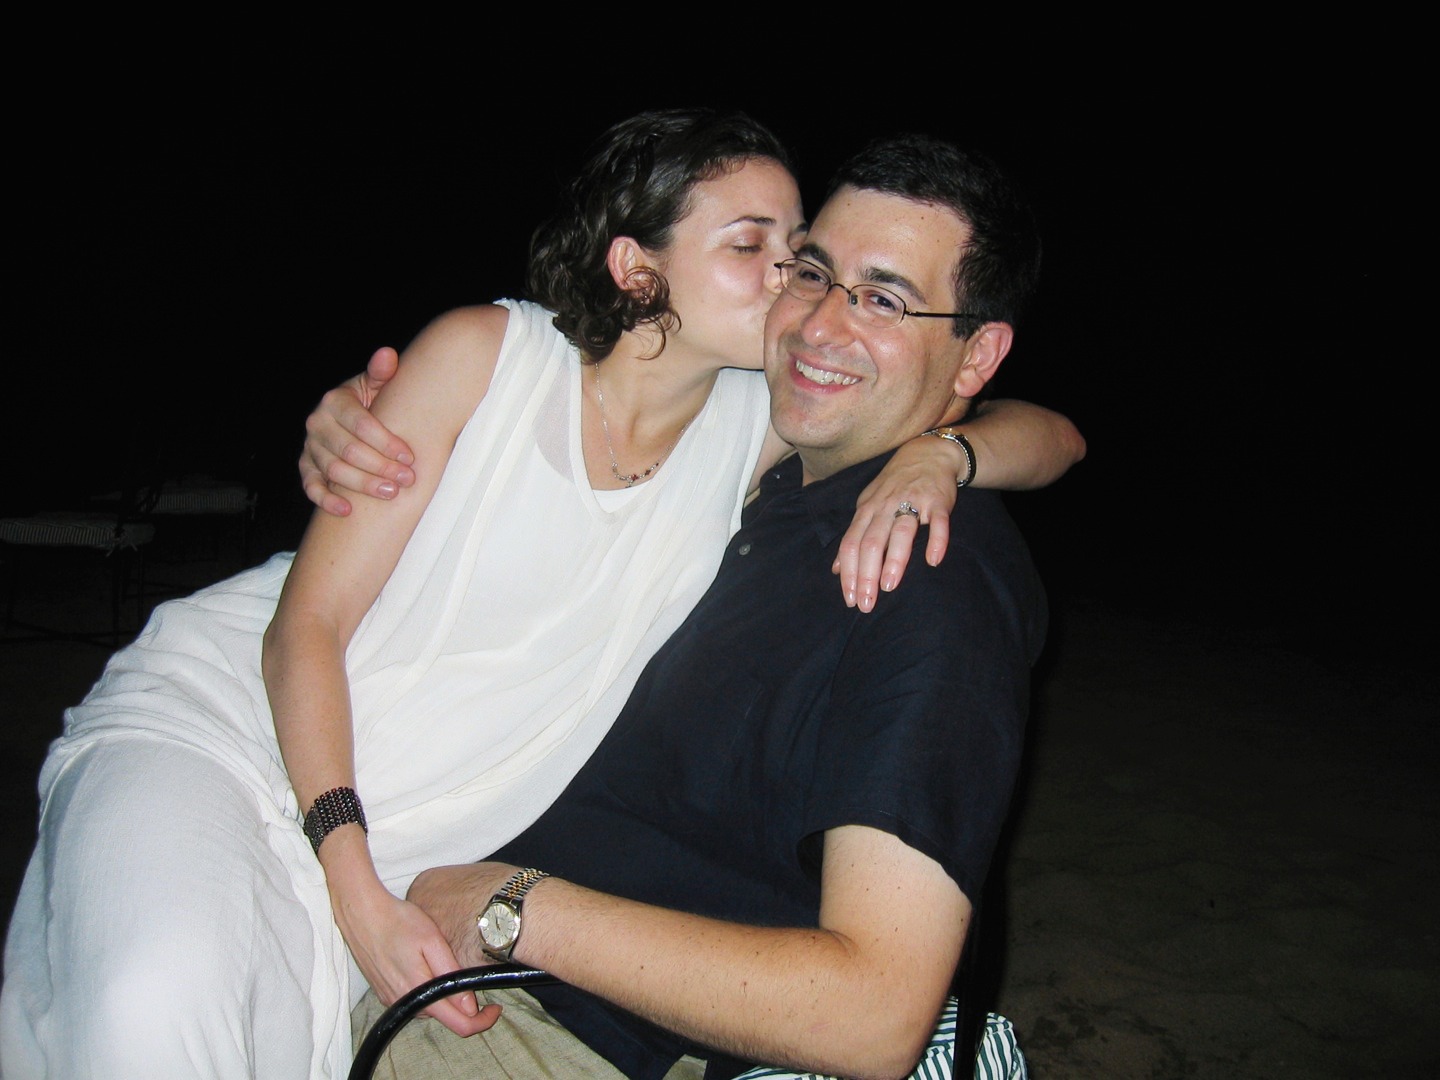 Sandberg and her husband Goldberg at his brother Rob's rehearsal dinner in Mexico in 2003 (Courtesy of Sheryl Sandberg)